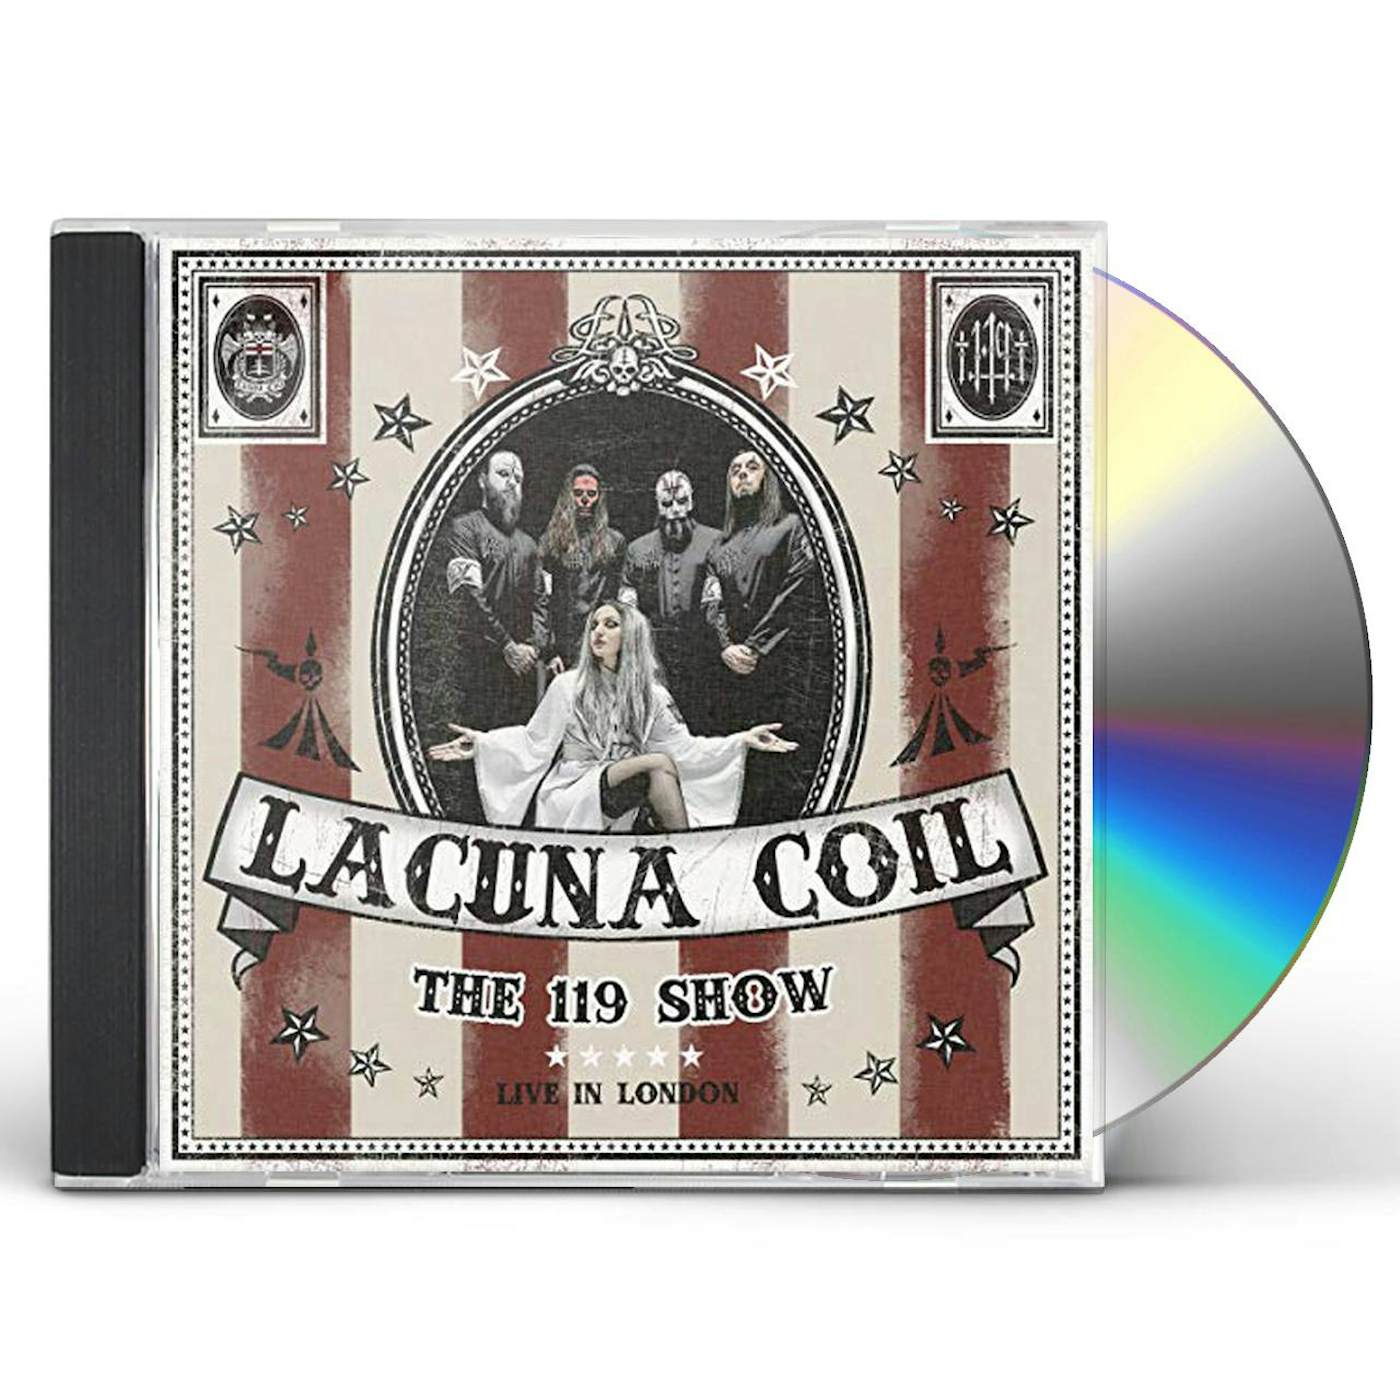 Lacuna Coil 119 SHOW: LIVE IN LONDON CD